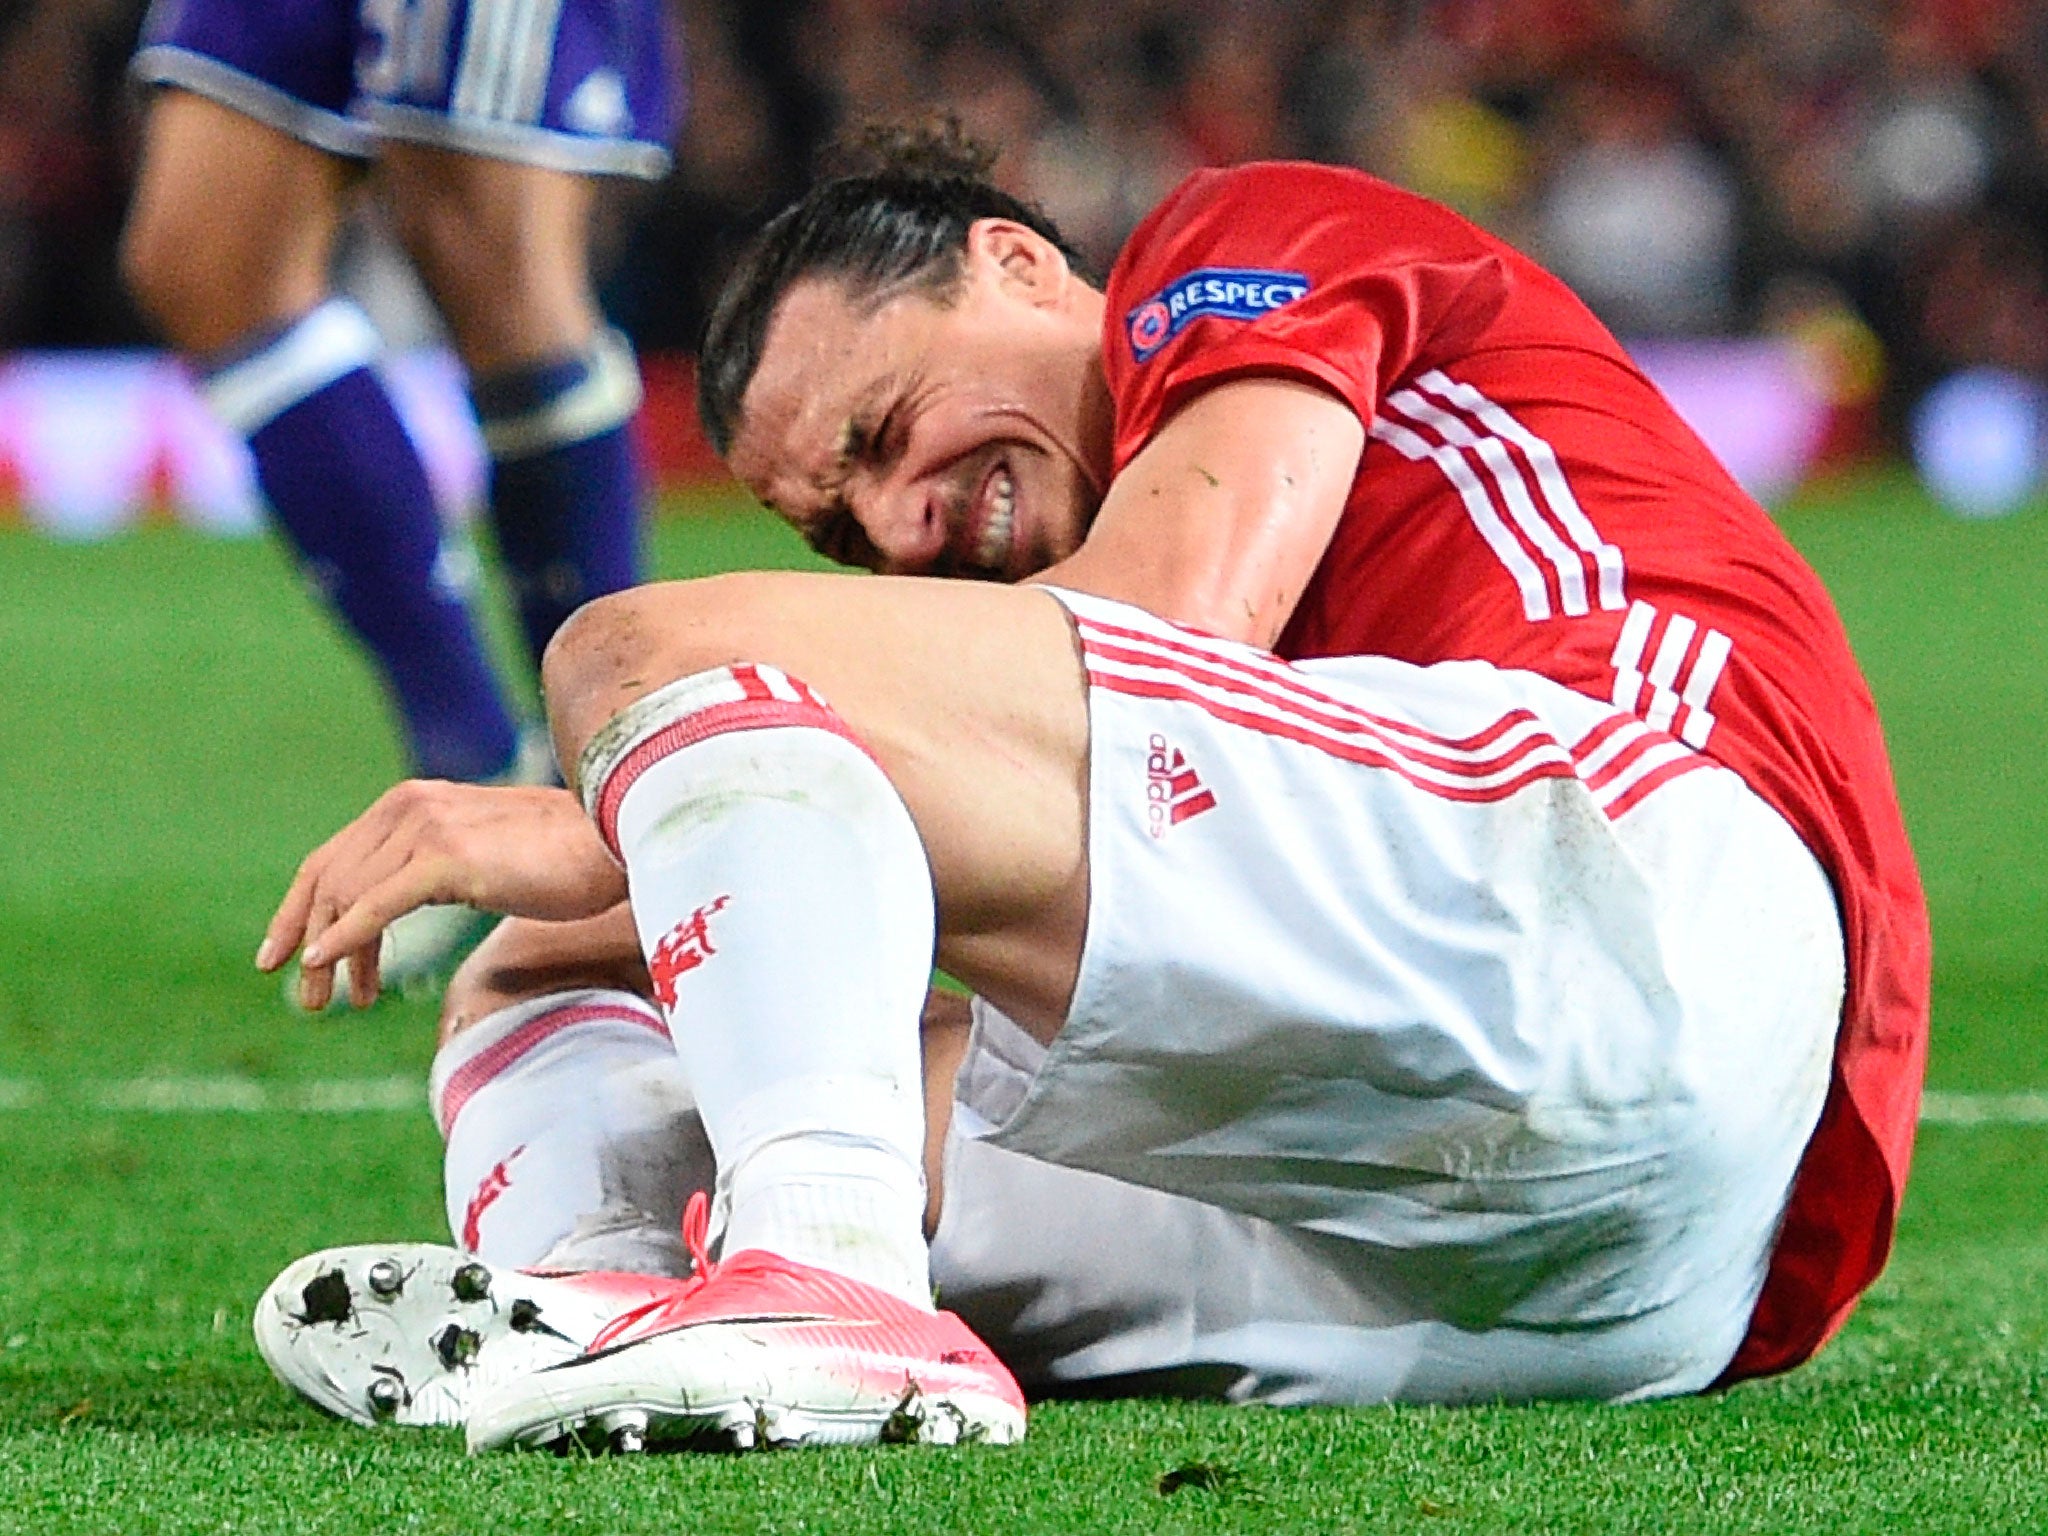 Zlatan Ibrahimovic may not play again this season after suffering a knee injury on Thursday